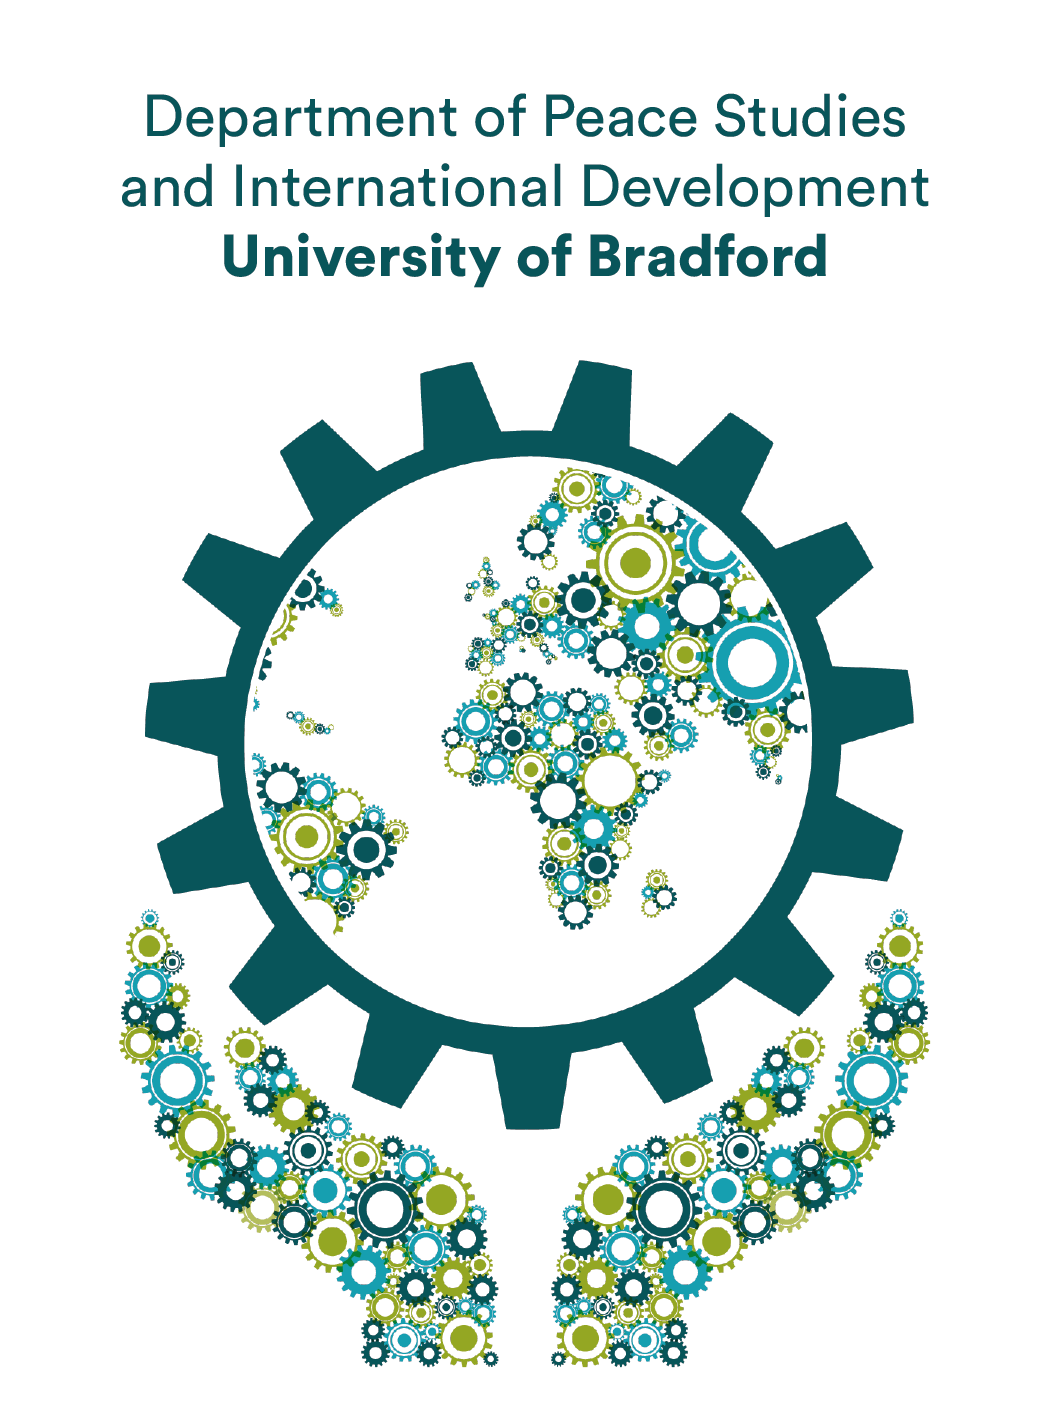 Logo of the Department of Peace Studies and International Development at the University of Bradford